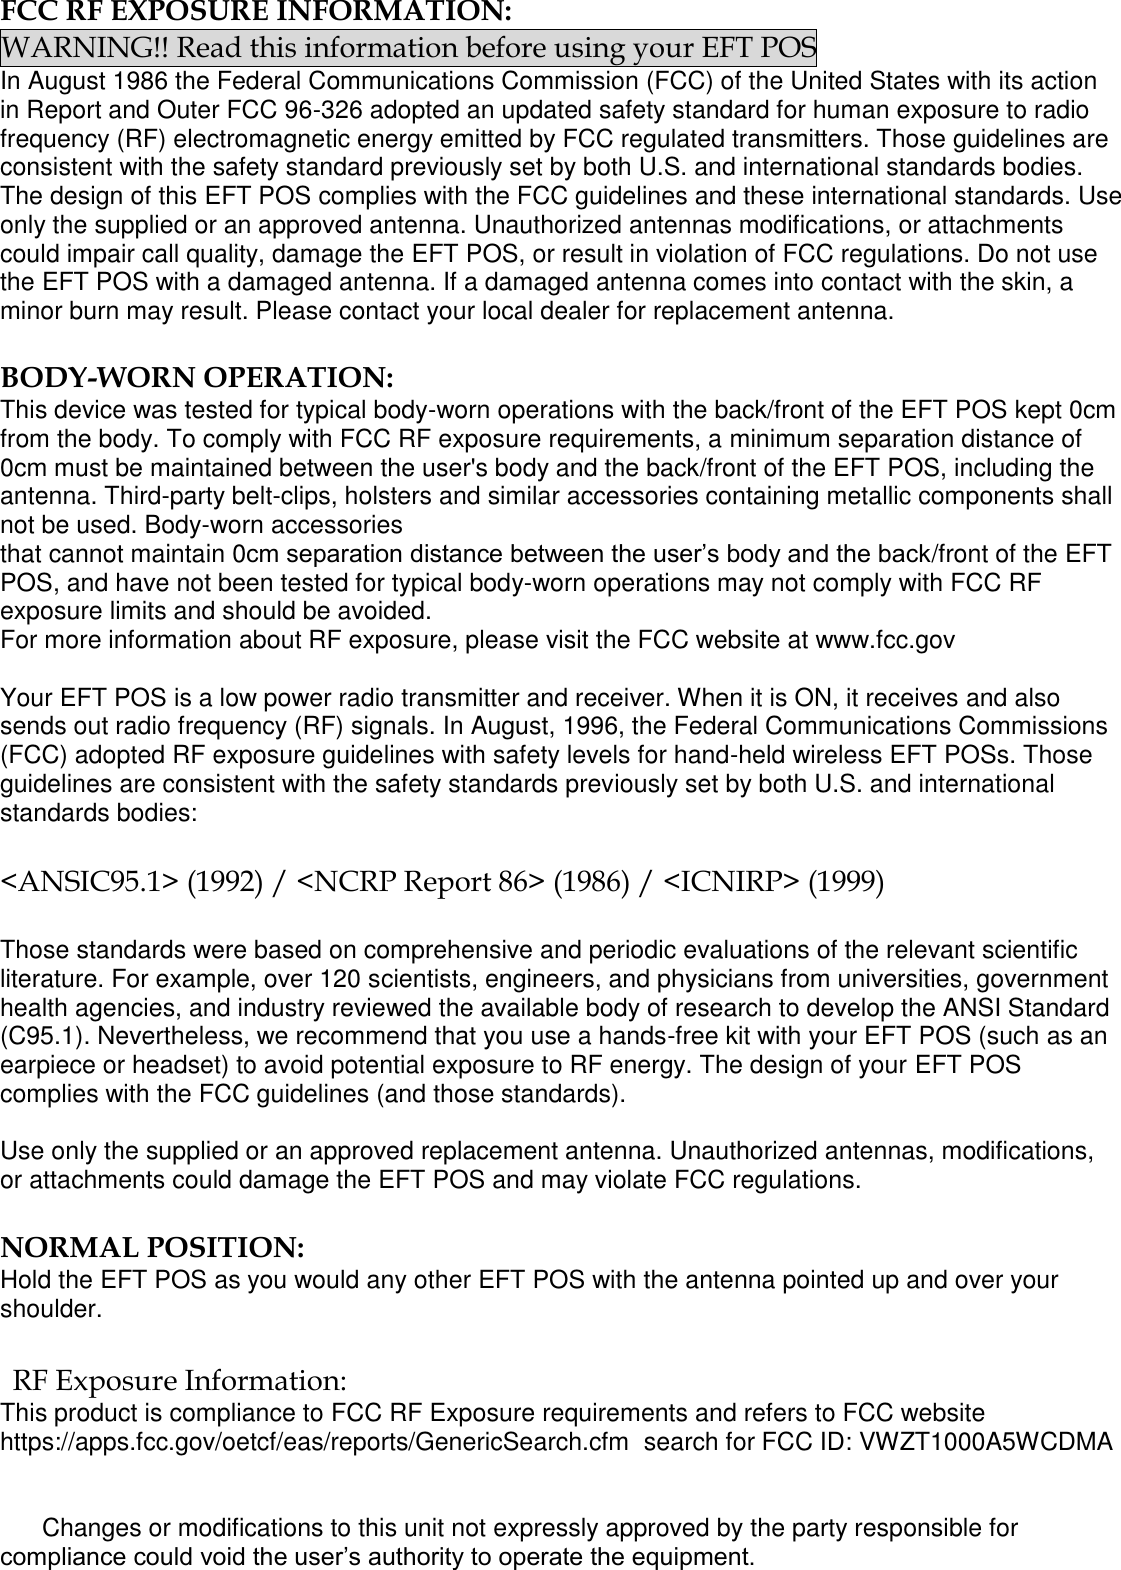  FCC RF EXPOSURE INFORMATION: WARNING!! Read this information before using your EFT POS In August 1986 the Federal Communications Commission (FCC) of the United States with its action in Report and Outer FCC 96-326 adopted an updated safety standard for human exposure to radio frequency (RF) electromagnetic energy emitted by FCC regulated transmitters. Those guidelines are consistent with the safety standard previously set by both U.S. and international standards bodies. The design of this EFT POS complies with the FCC guidelines and these international standards. Use only the supplied or an approved antenna. Unauthorized antennas modifications, or attachments could impair call quality, damage the EFT POS, or result in violation of FCC regulations. Do not use the EFT POS with a damaged antenna. If a damaged antenna comes into contact with the skin, a minor burn may result. Please contact your local dealer for replacement antenna.  BODY-WORN OPERATION: This device was tested for typical body-worn operations with the back/front of the EFT POS kept 0cm from the body. To comply with FCC RF exposure requirements, a minimum separation distance of 0cm must be maintained between the user&apos;s body and the back/front of the EFT POS, including the antenna. Third-party belt-clips, holsters and similar accessories containing metallic components shall not be used. Body-worn accessories that cannot maintain 0cm separation distance between the user’s body and the back/front of the EFT POS, and have not been tested for typical body-worn operations may not comply with FCC RF exposure limits and should be avoided. For more information about RF exposure, please visit the FCC website at www.fcc.gov  Your EFT POS is a low power radio transmitter and receiver. When it is ON, it receives and also sends out radio frequency (RF) signals. In August, 1996, the Federal Communications Commissions (FCC) adopted RF exposure guidelines with safety levels for hand-held wireless EFT POSs. Those guidelines are consistent with the safety standards previously set by both U.S. and international standards bodies:  &lt;ANSIC95.1&gt; (1992) / &lt;NCRP Report 86&gt; (1986) / &lt;ICNIRP&gt; (1999)  Those standards were based on comprehensive and periodic evaluations of the relevant scientific literature. For example, over 120 scientists, engineers, and physicians from universities, government health agencies, and industry reviewed the available body of research to develop the ANSI Standard (C95.1). Nevertheless, we recommend that you use a hands-free kit with your EFT POS (such as an earpiece or headset) to avoid potential exposure to RF energy. The design of your EFT POS complies with the FCC guidelines (and those standards).  Use only the supplied or an approved replacement antenna. Unauthorized antennas, modifications, or attachments could damage the EFT POS and may violate FCC regulations.   NORMAL POSITION:  Hold the EFT POS as you would any other EFT POS with the antenna pointed up and over your shoulder.  RF Exposure Information: This product is compliance to FCC RF Exposure requirements and refers to FCC website https://apps.fcc.gov/oetcf/eas/reports/GenericSearch.cfm  search for FCC ID: VWZT1000A5WCDMA         Changes or modifications to this unit not expressly approved by the party responsible for compliance could void the user’s authority to operate the equipment.  